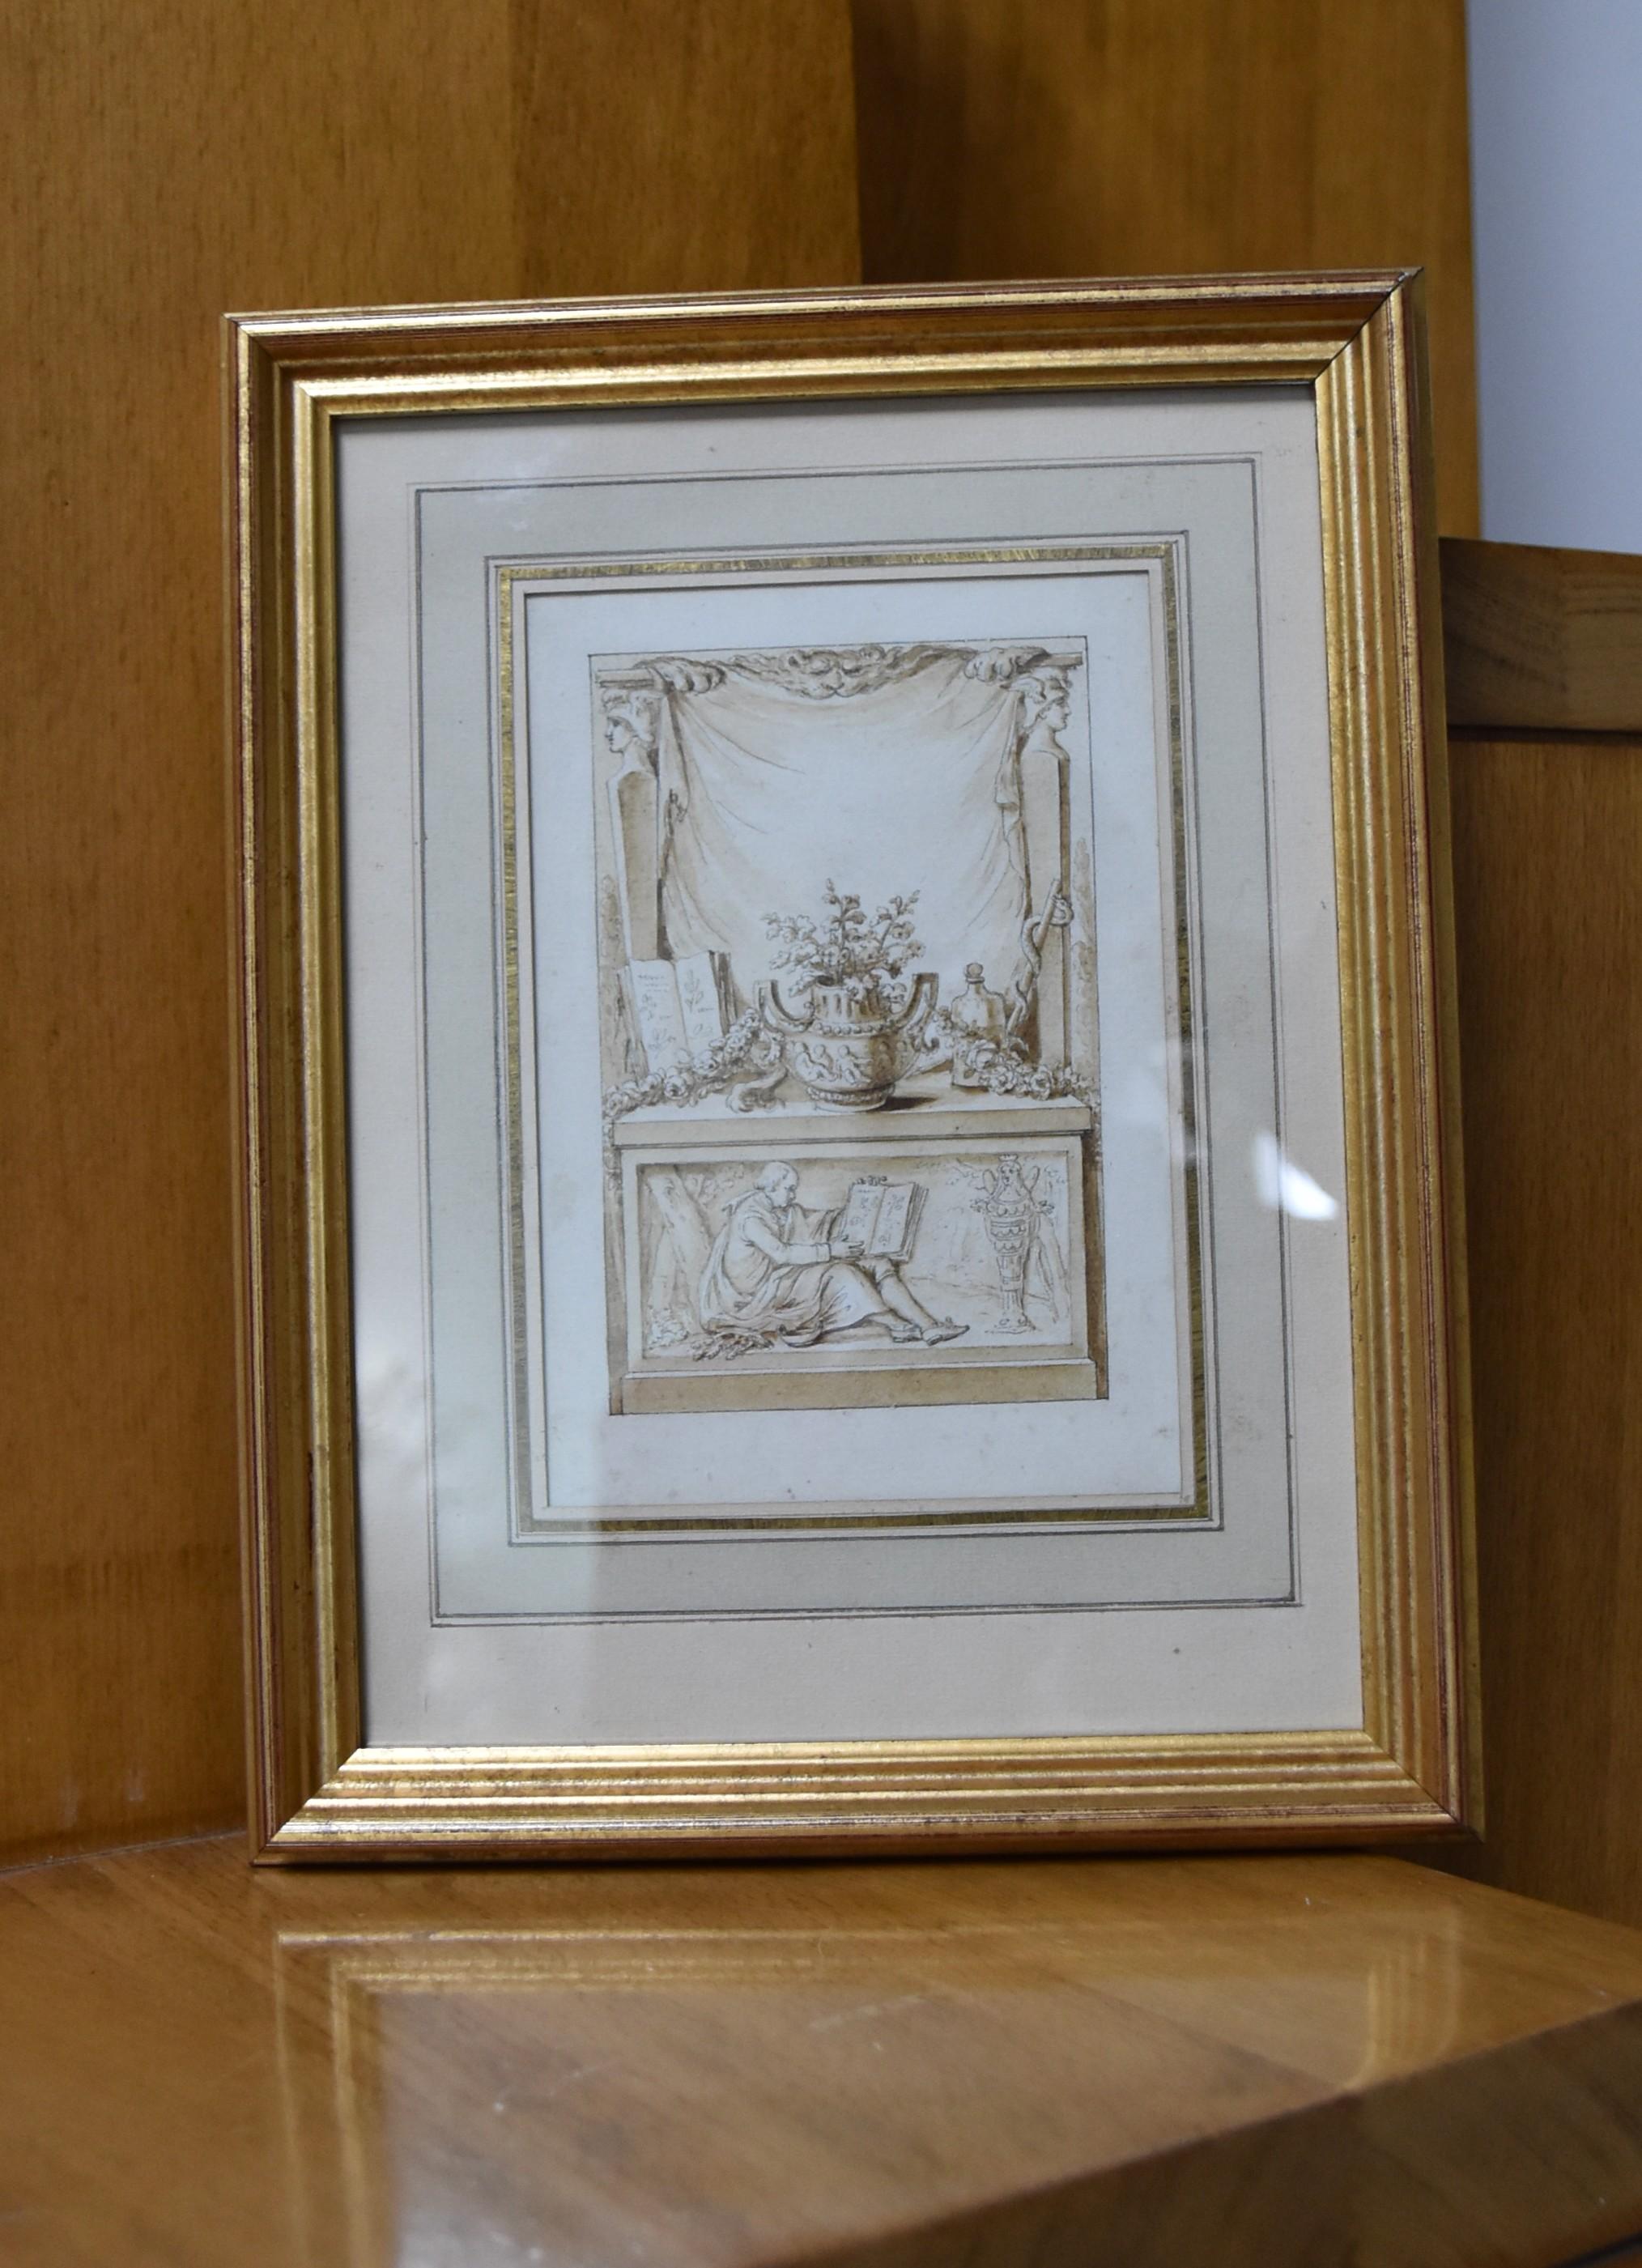 18th century French Neo Classical school, Study for frontispiece, drawing 5